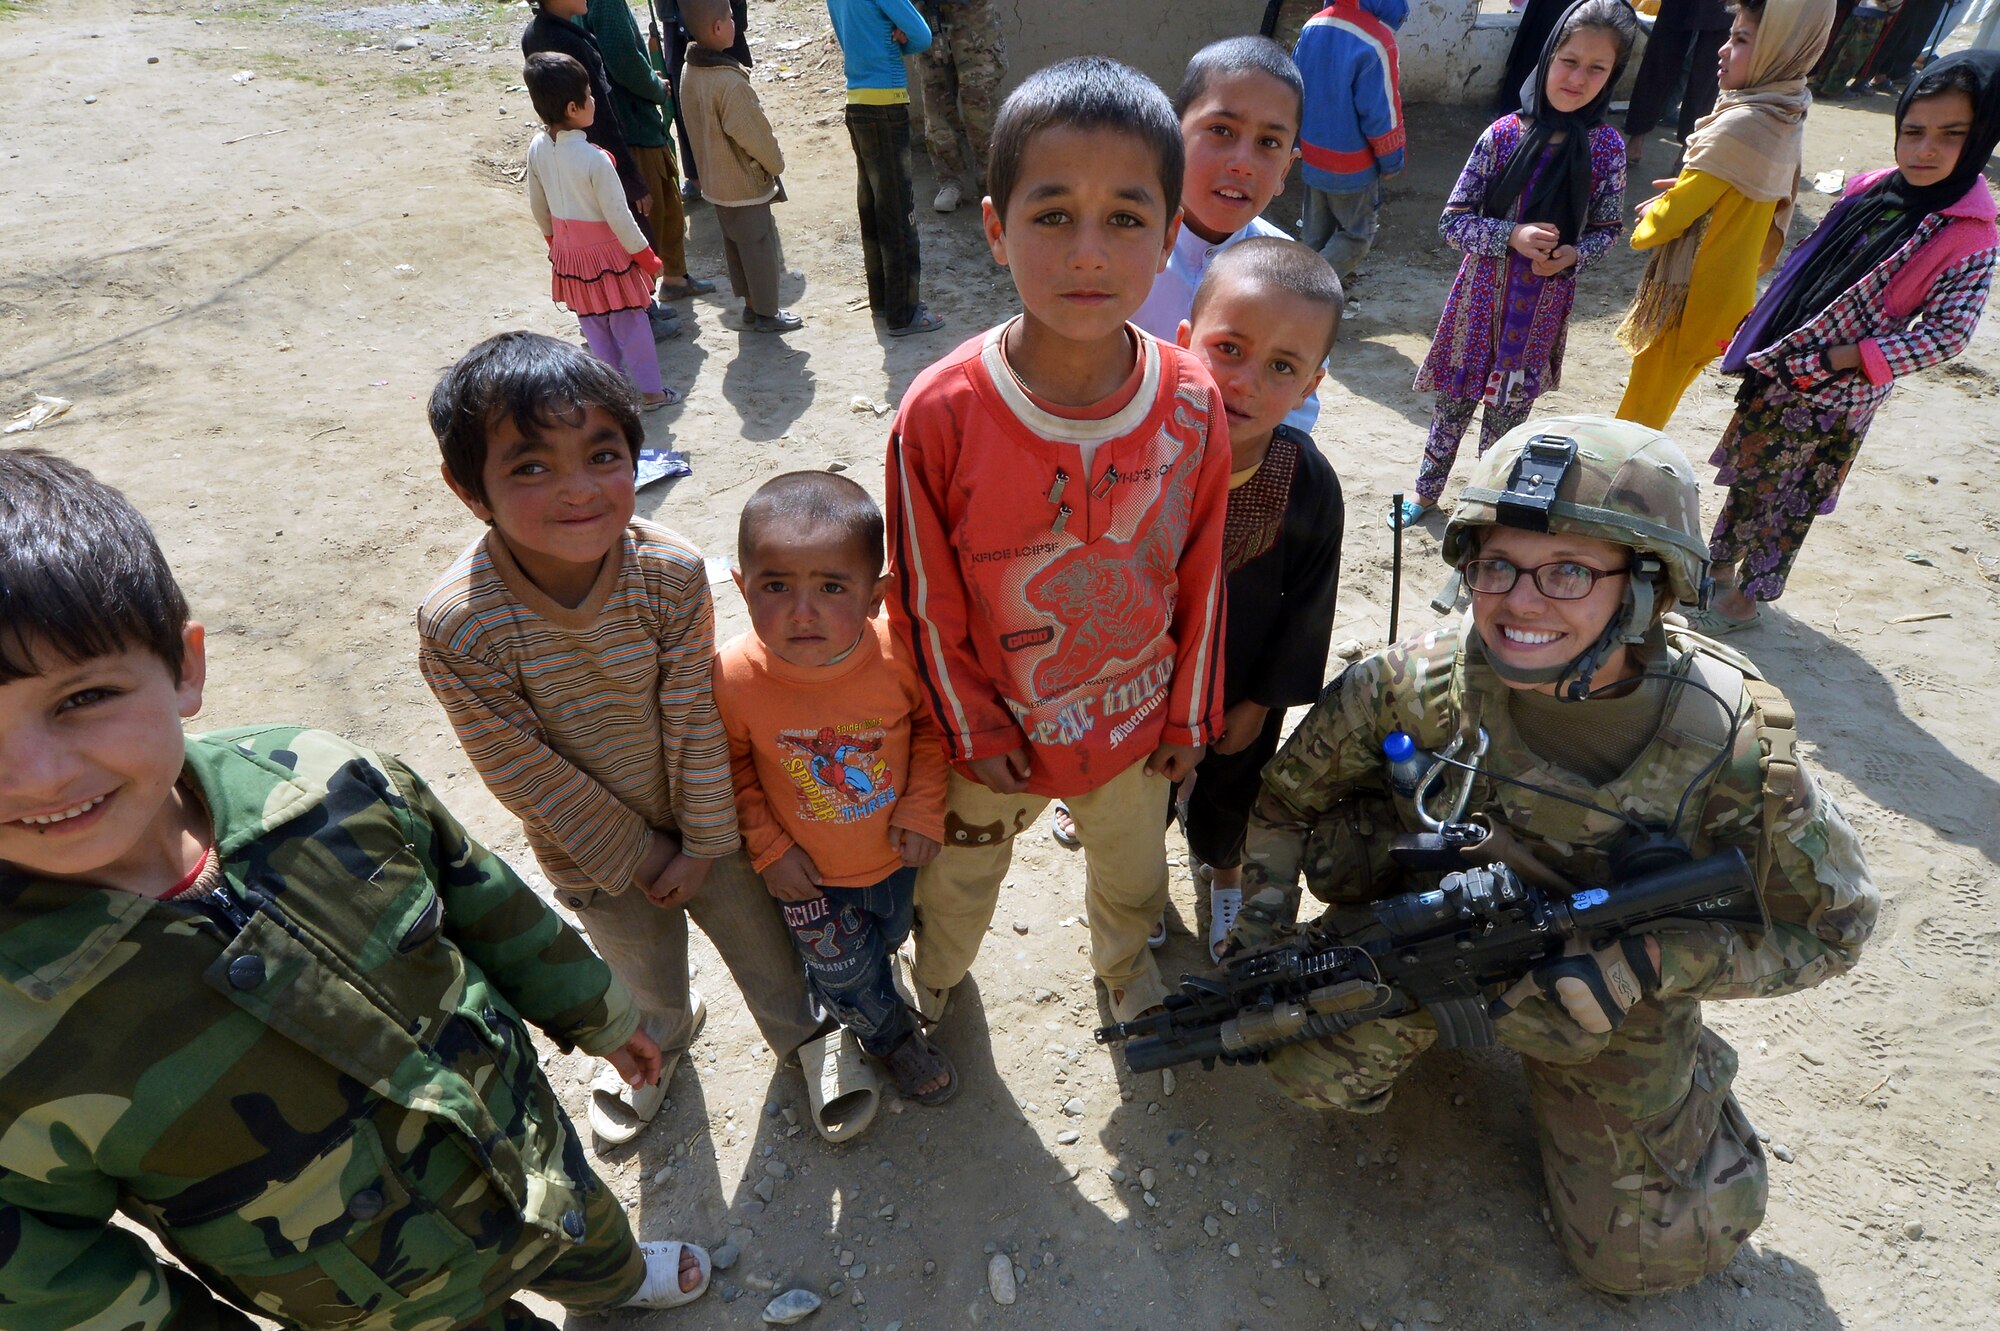 Staff Sgt. Elizabeth Rosato, 755th Expeditionary Security Forces Squadron Reaper Team 1 member, meets with local Afghan children outside of Bagram Airfield, Afghanistan, March 11, 2013.  The Reaper team conducts patrols near Bagram Airfield to counter improvised explosive devices and indirect fire attacks as well as to engage locals’ support in protecting the base. (U.S. Air Force photo/Senior Airman Chris Willis)